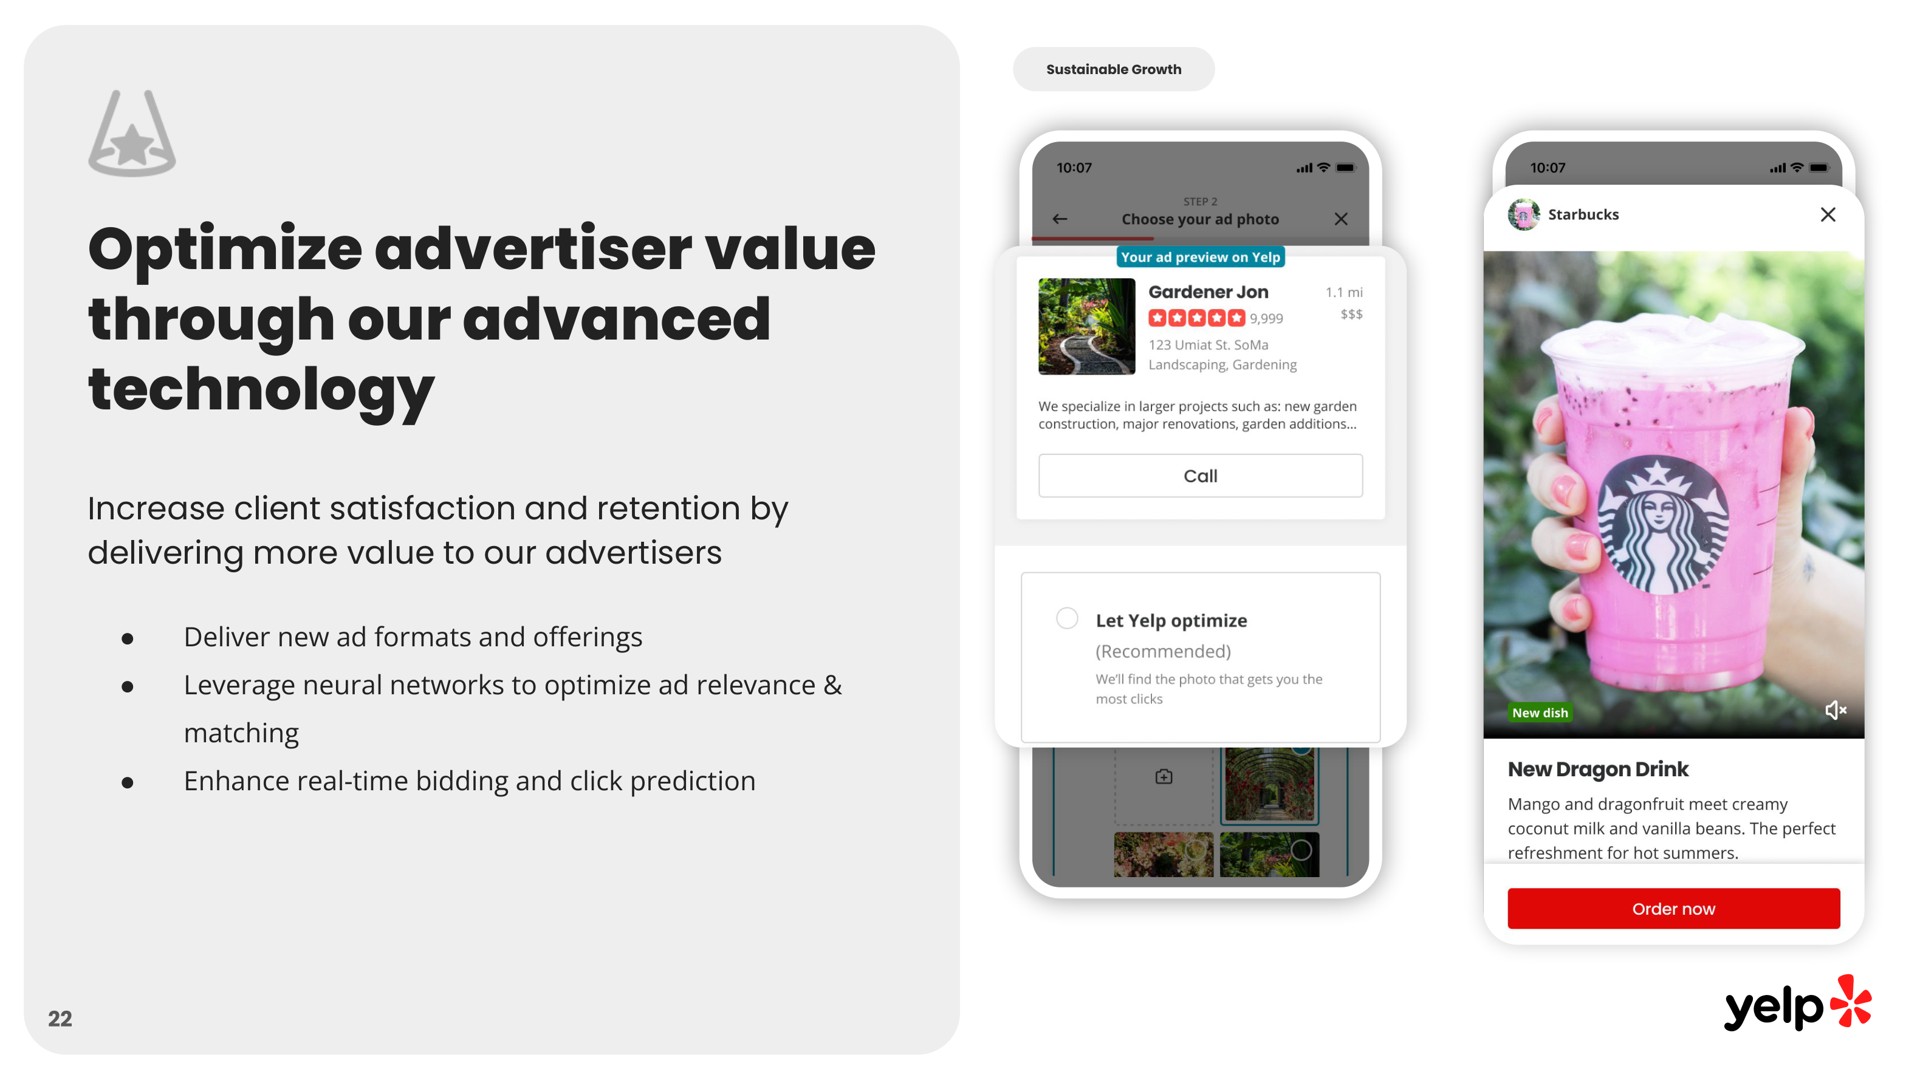 optimize advertiser value through our advanced technology increase client satisfaction and retention by delivering more value to our advertisers | Yelp